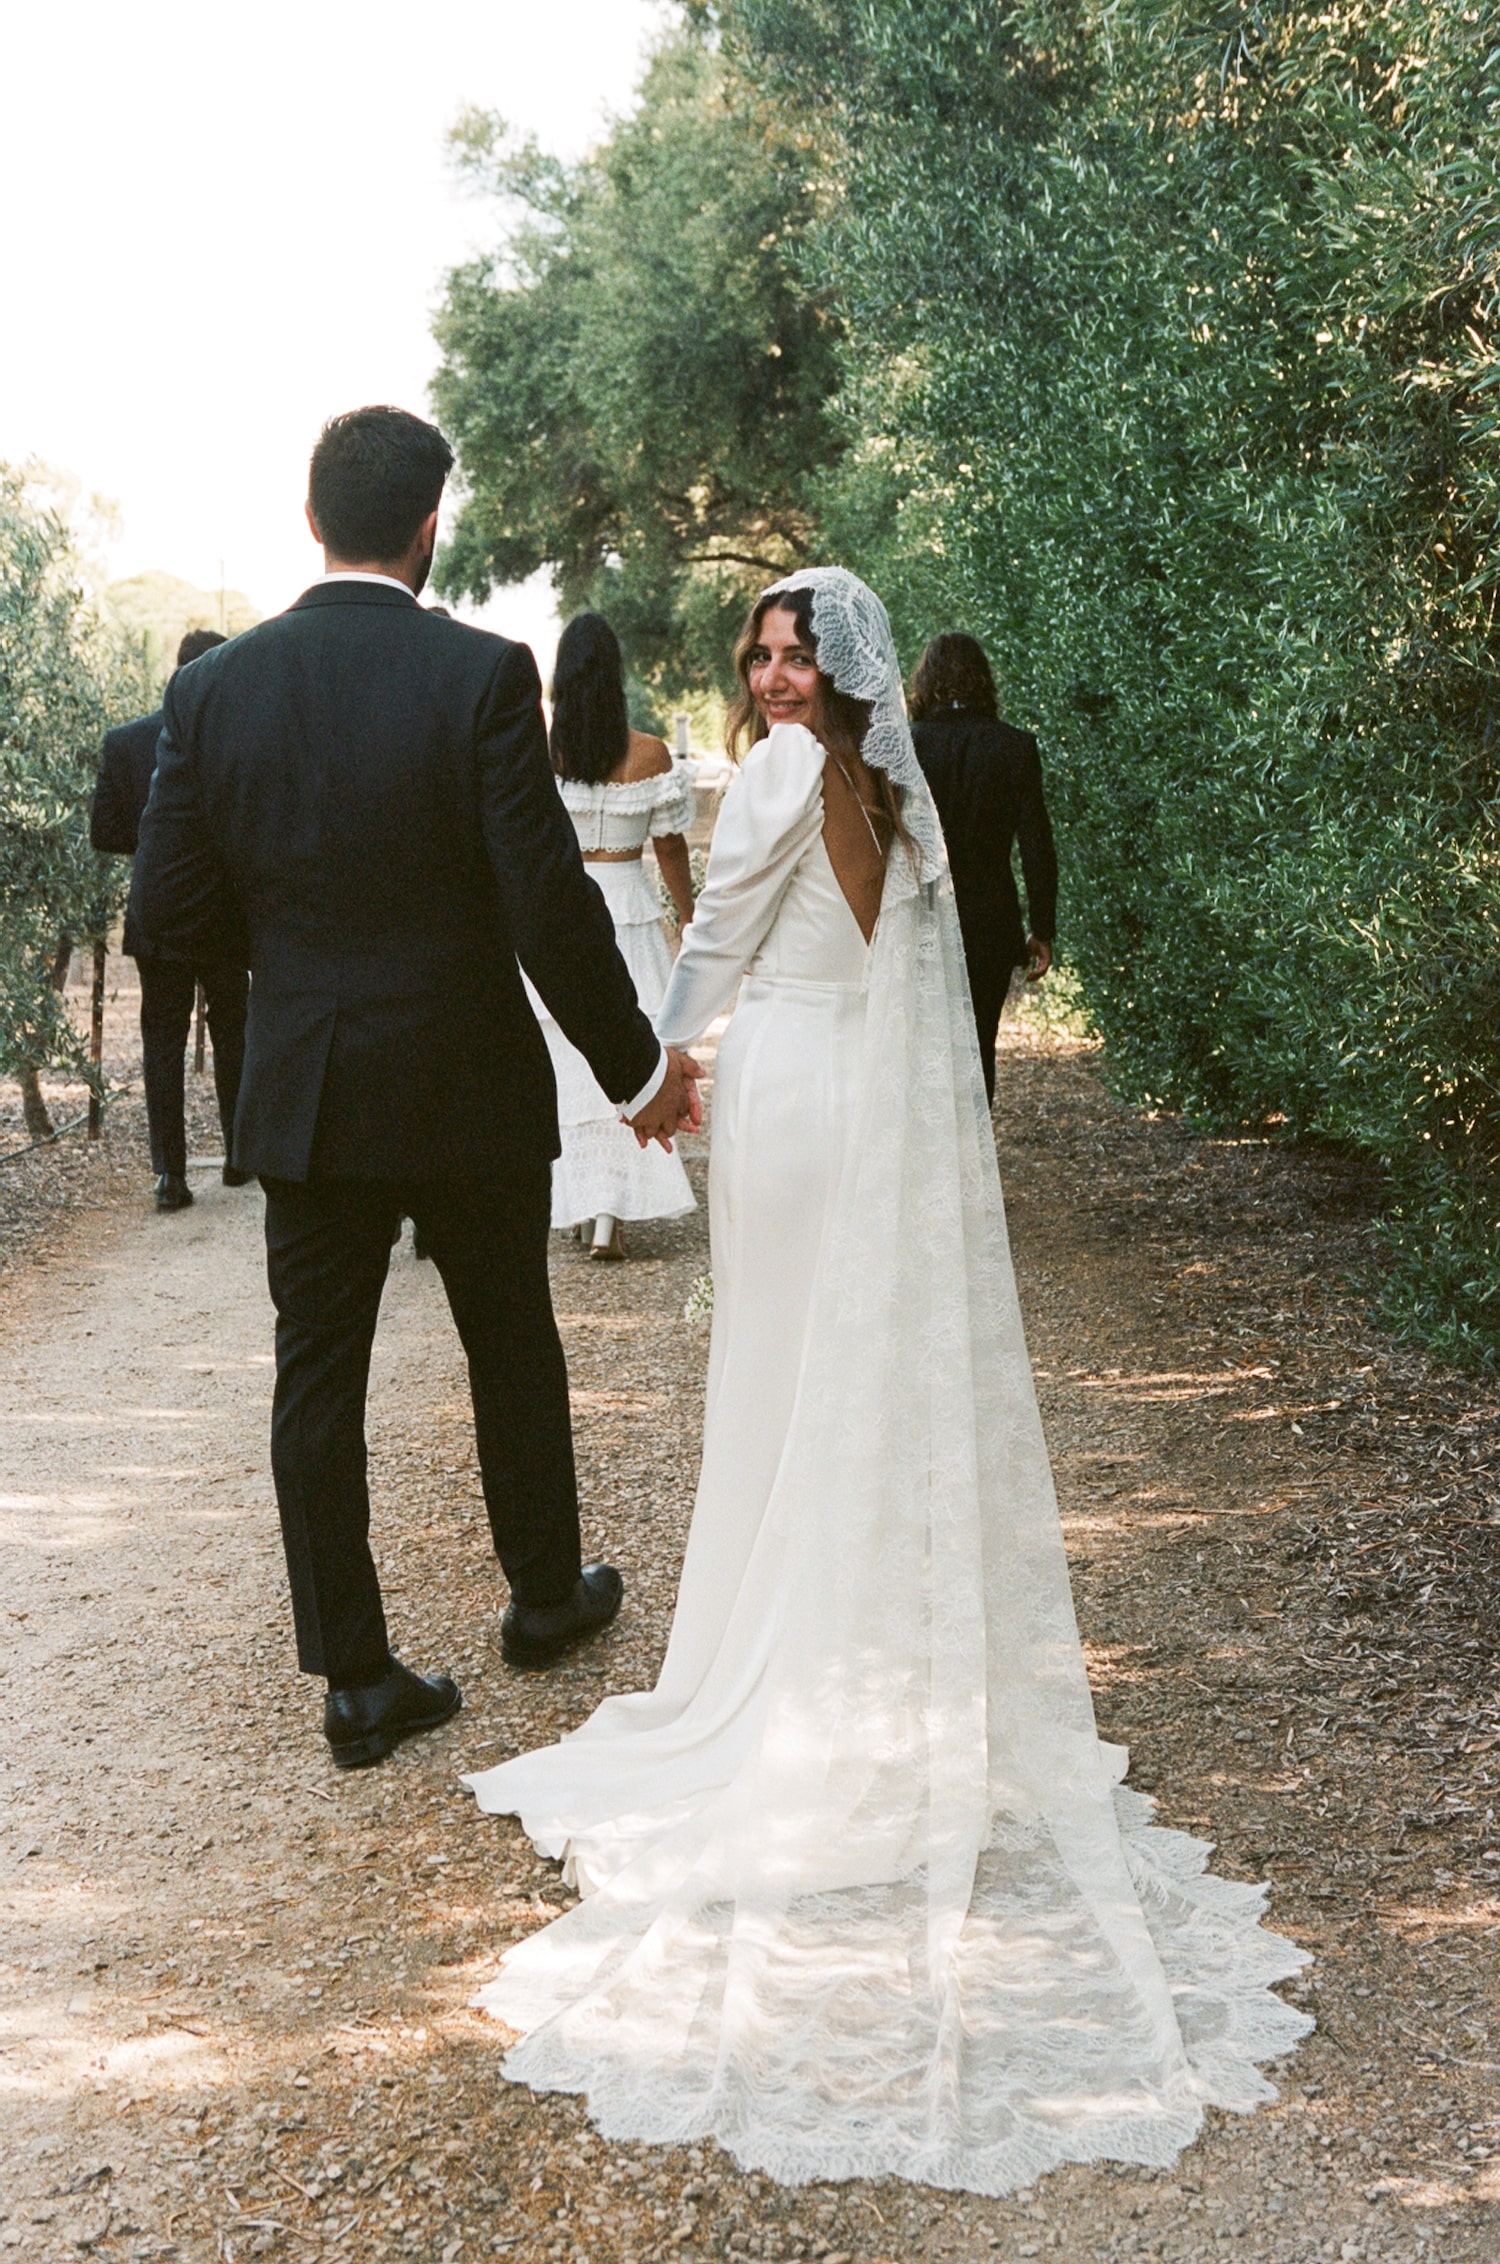 Back view of the married couple holding hands and walking through a vineyard. The brides gown has a deep V back neckline and a long chantilly lace veil.